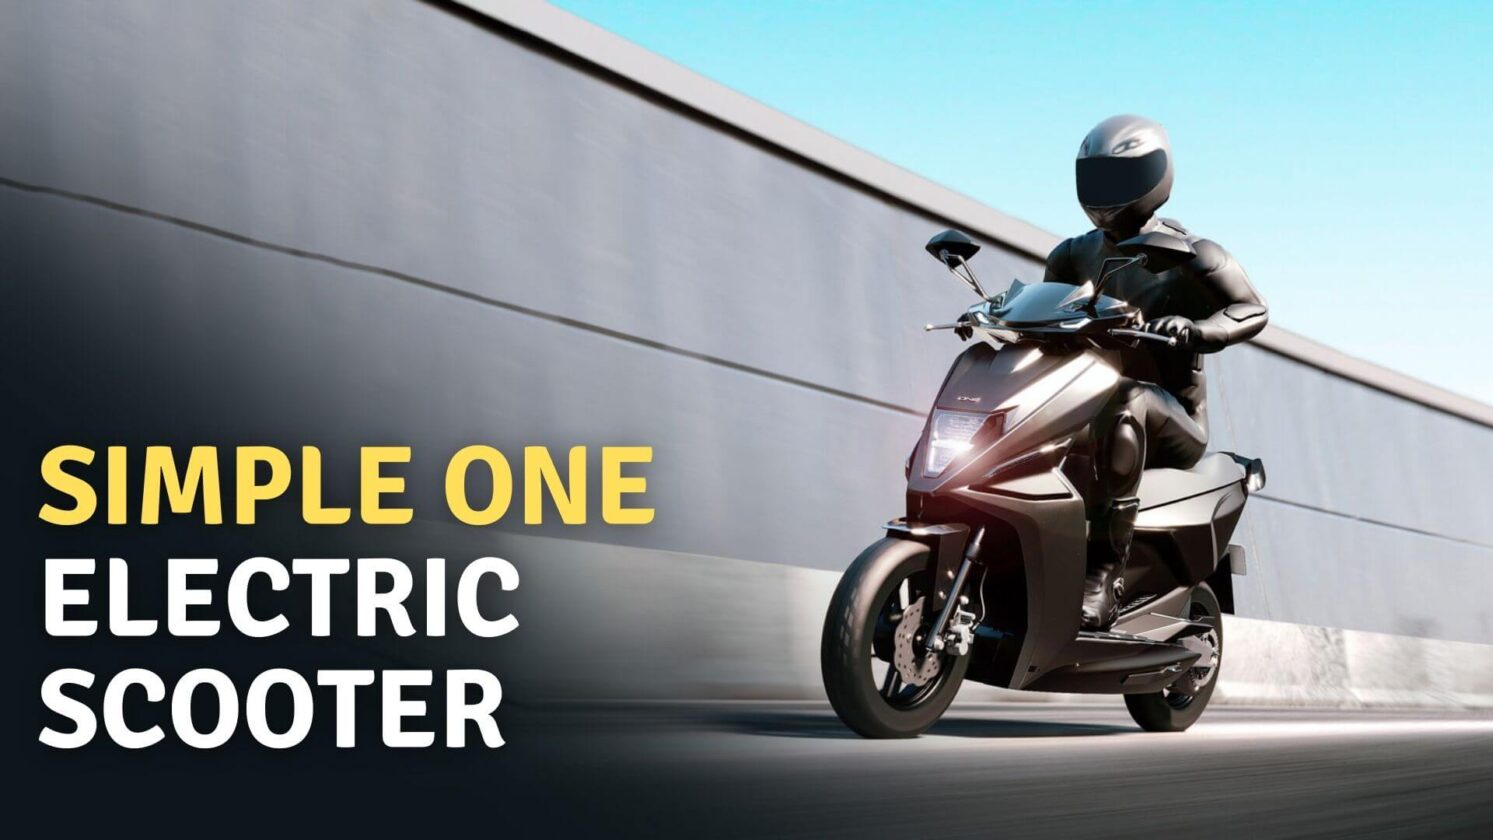 simple one electric scooter price range and top speed